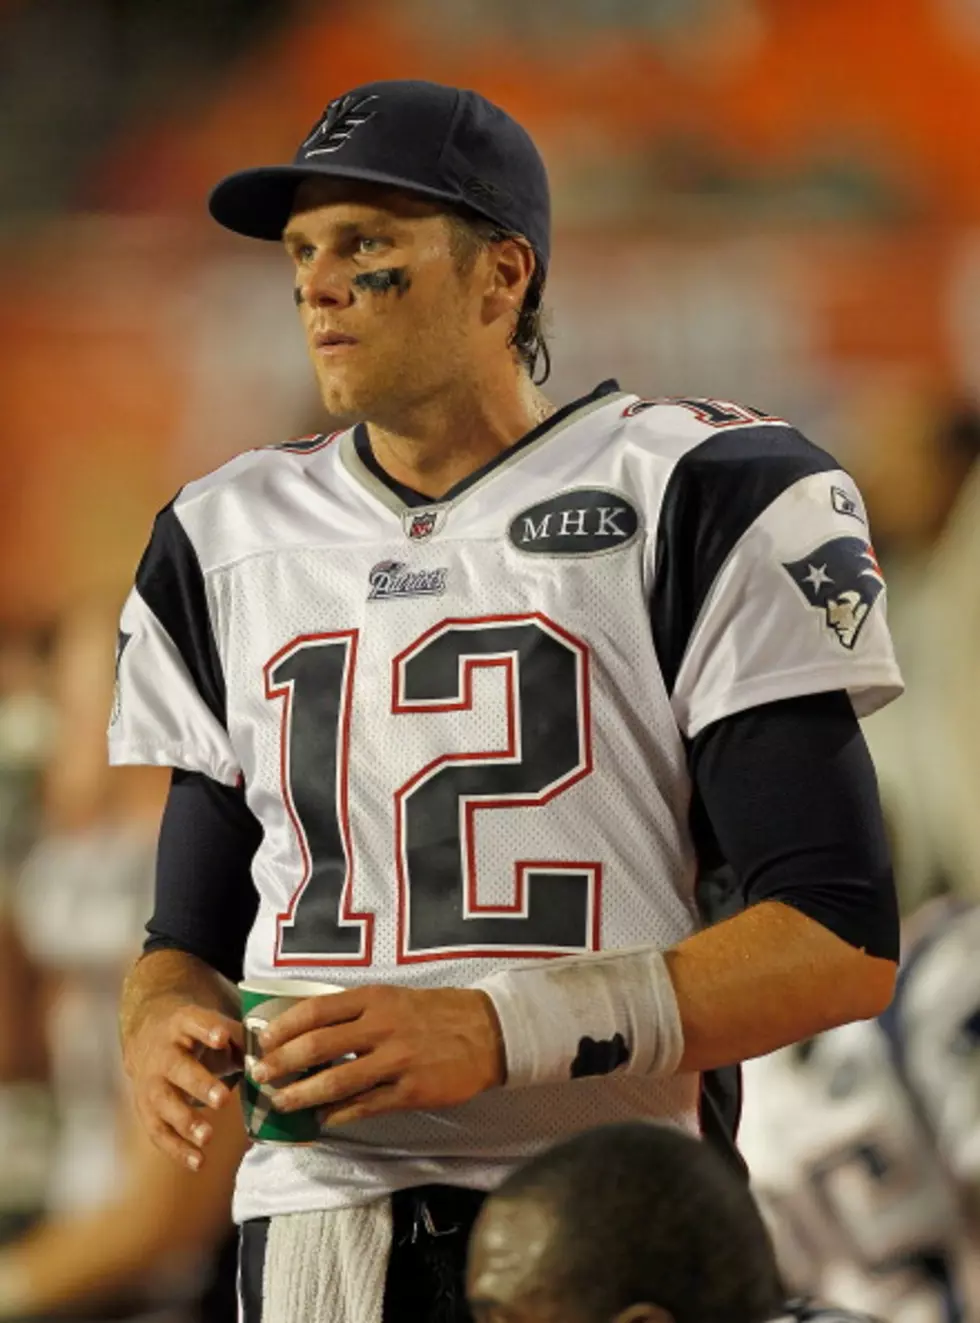 Tom Brady Tells Fans to Drink Early, Pats Say He Meant Water.